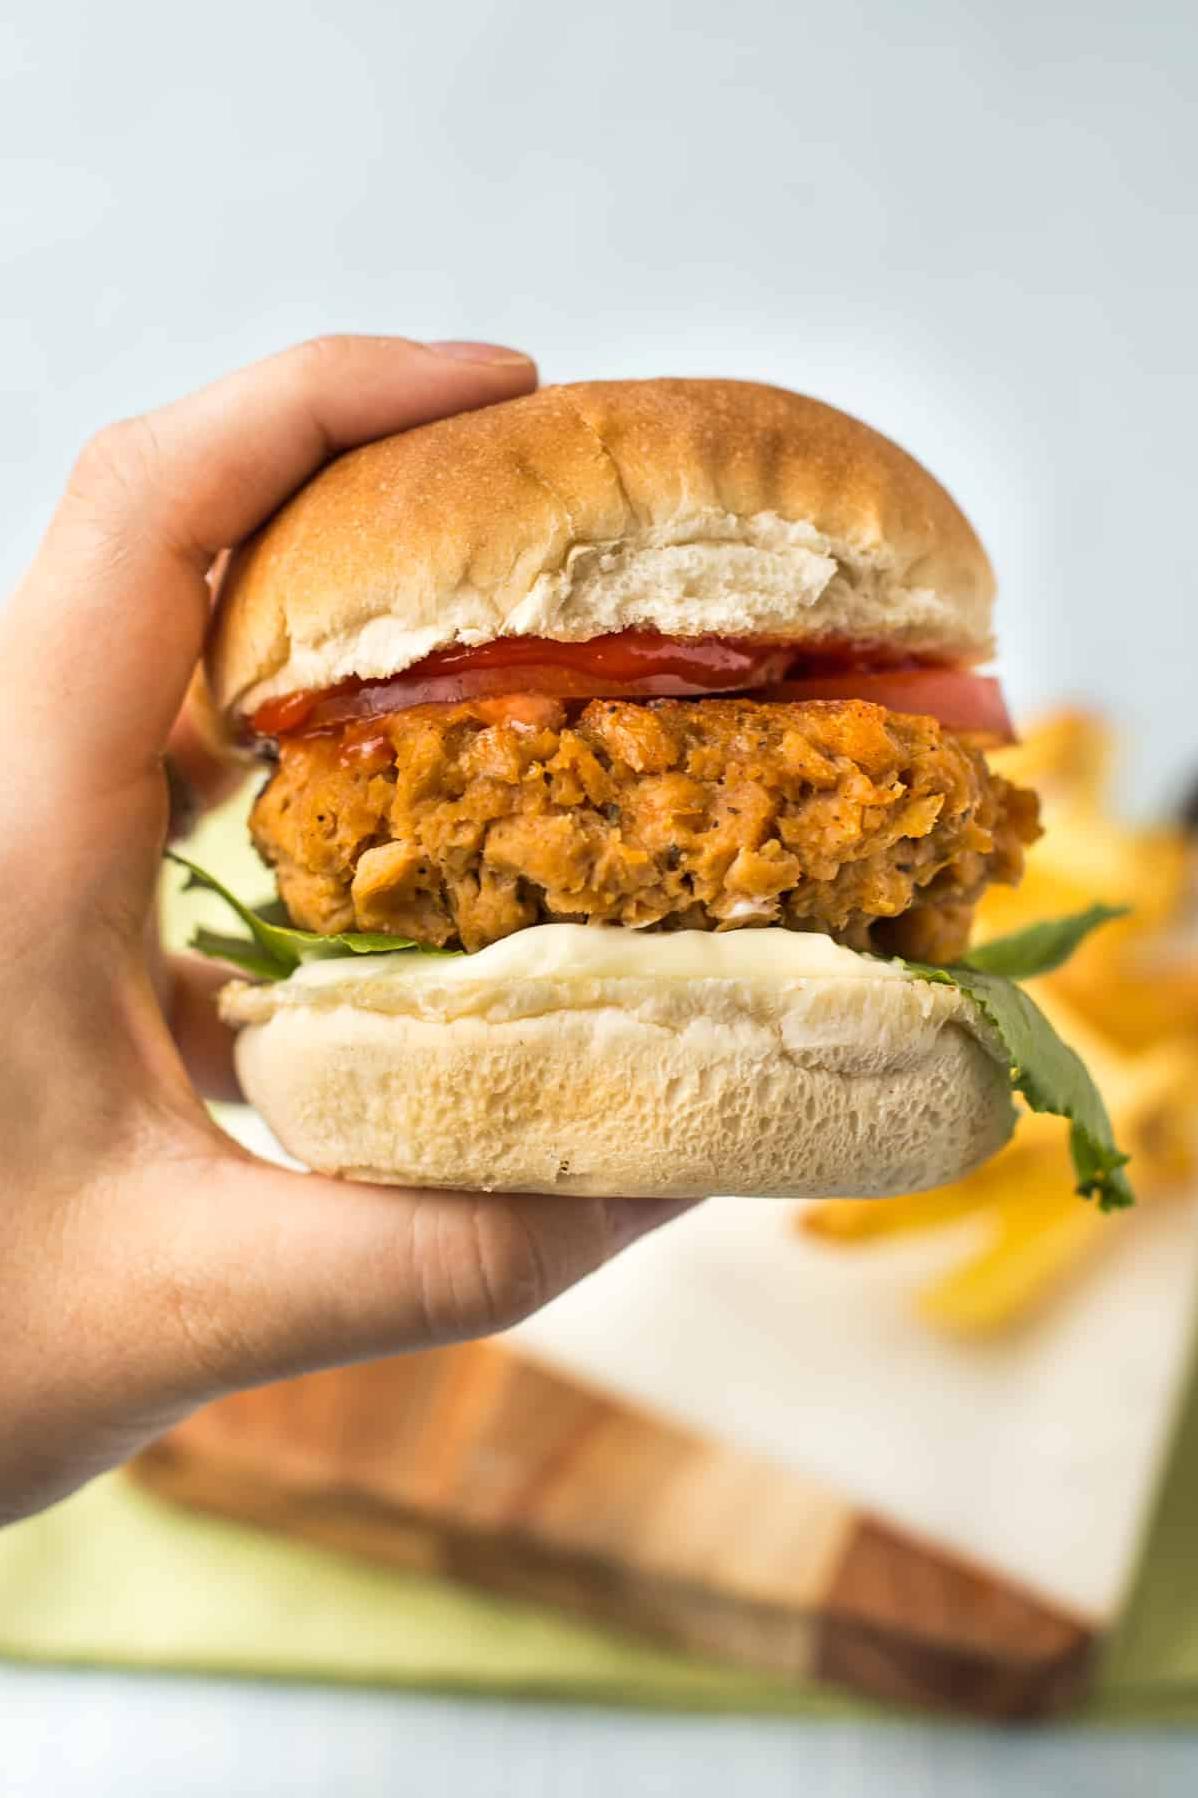  The perfect balance of flavors and textures between the patty, veggies, and gluten-free bun.